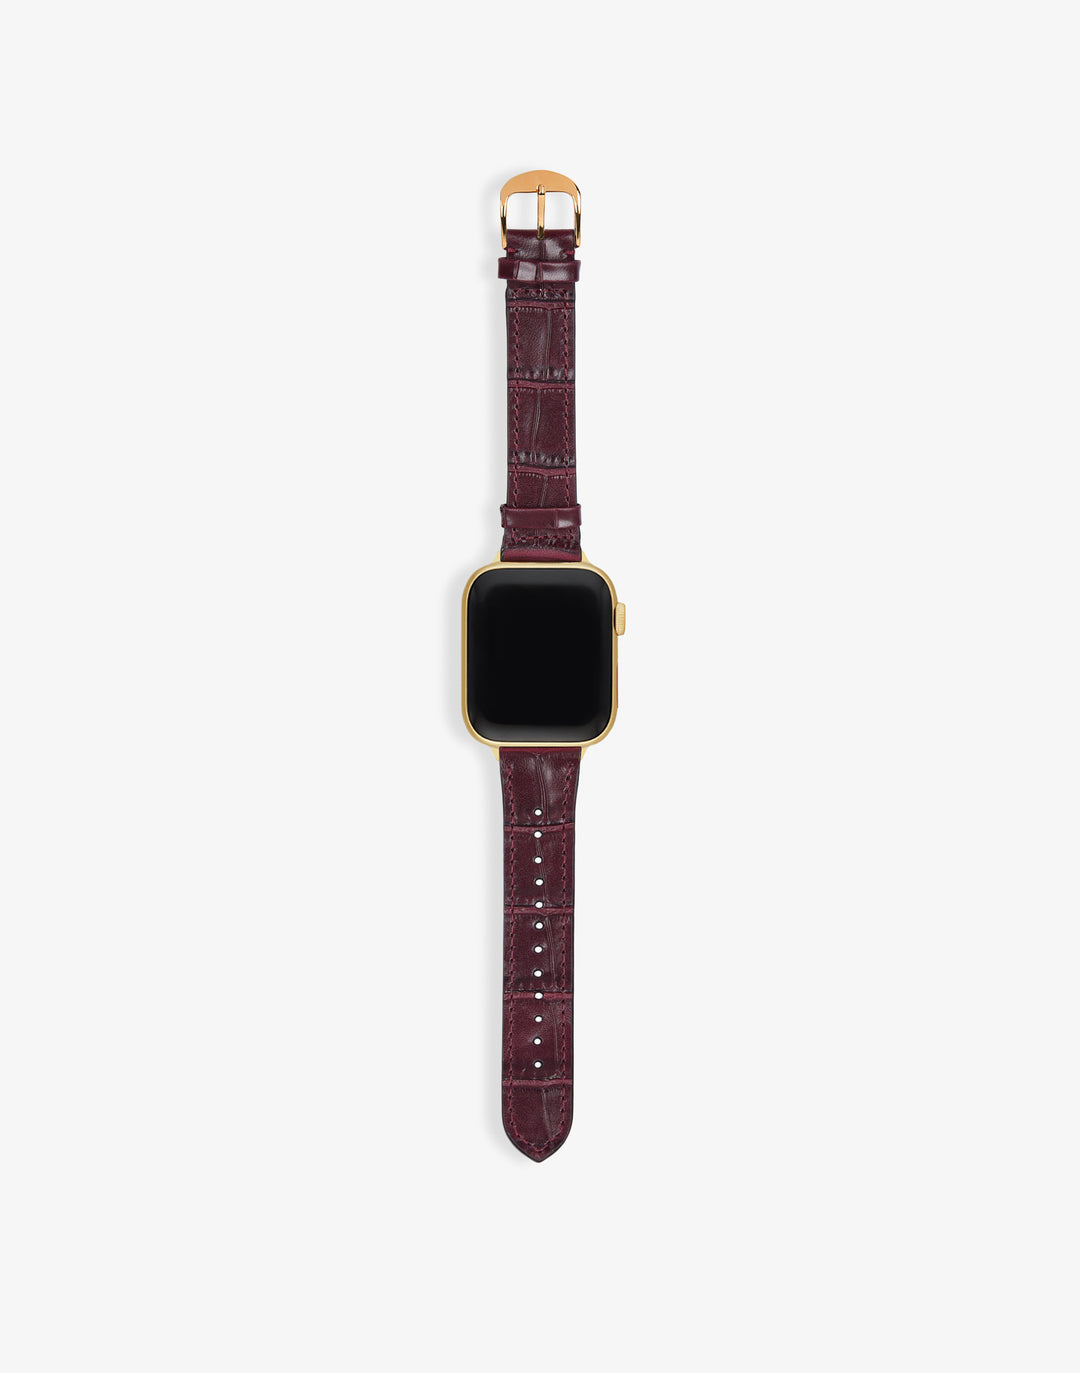 Hyer Goods recycled leather Apple Watch Band burgundy crocodile #color_burgundy-croco 